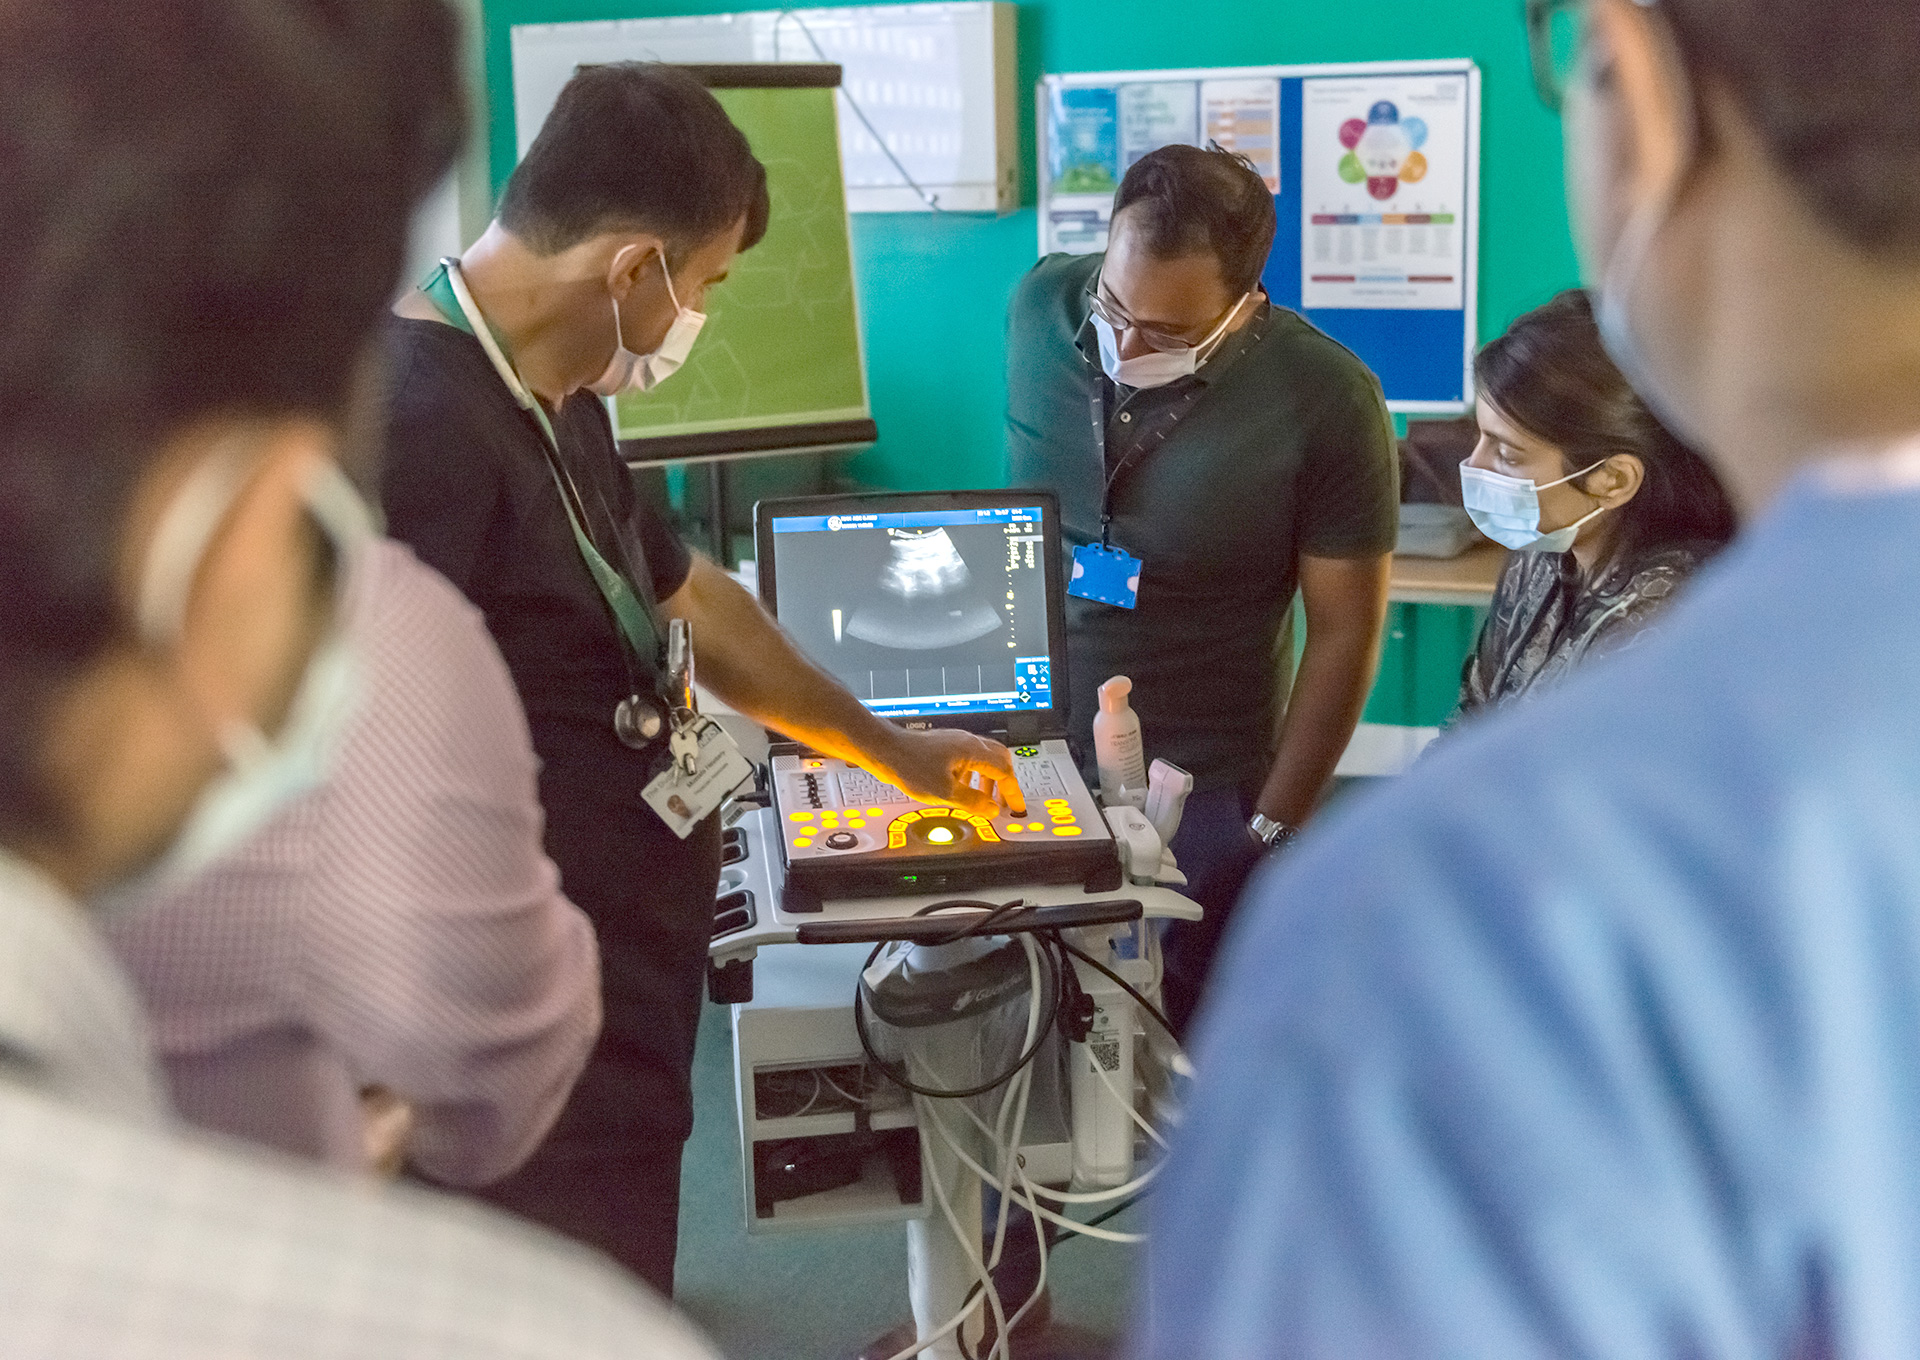 Clinical workshop training with medics with ultrasound machine